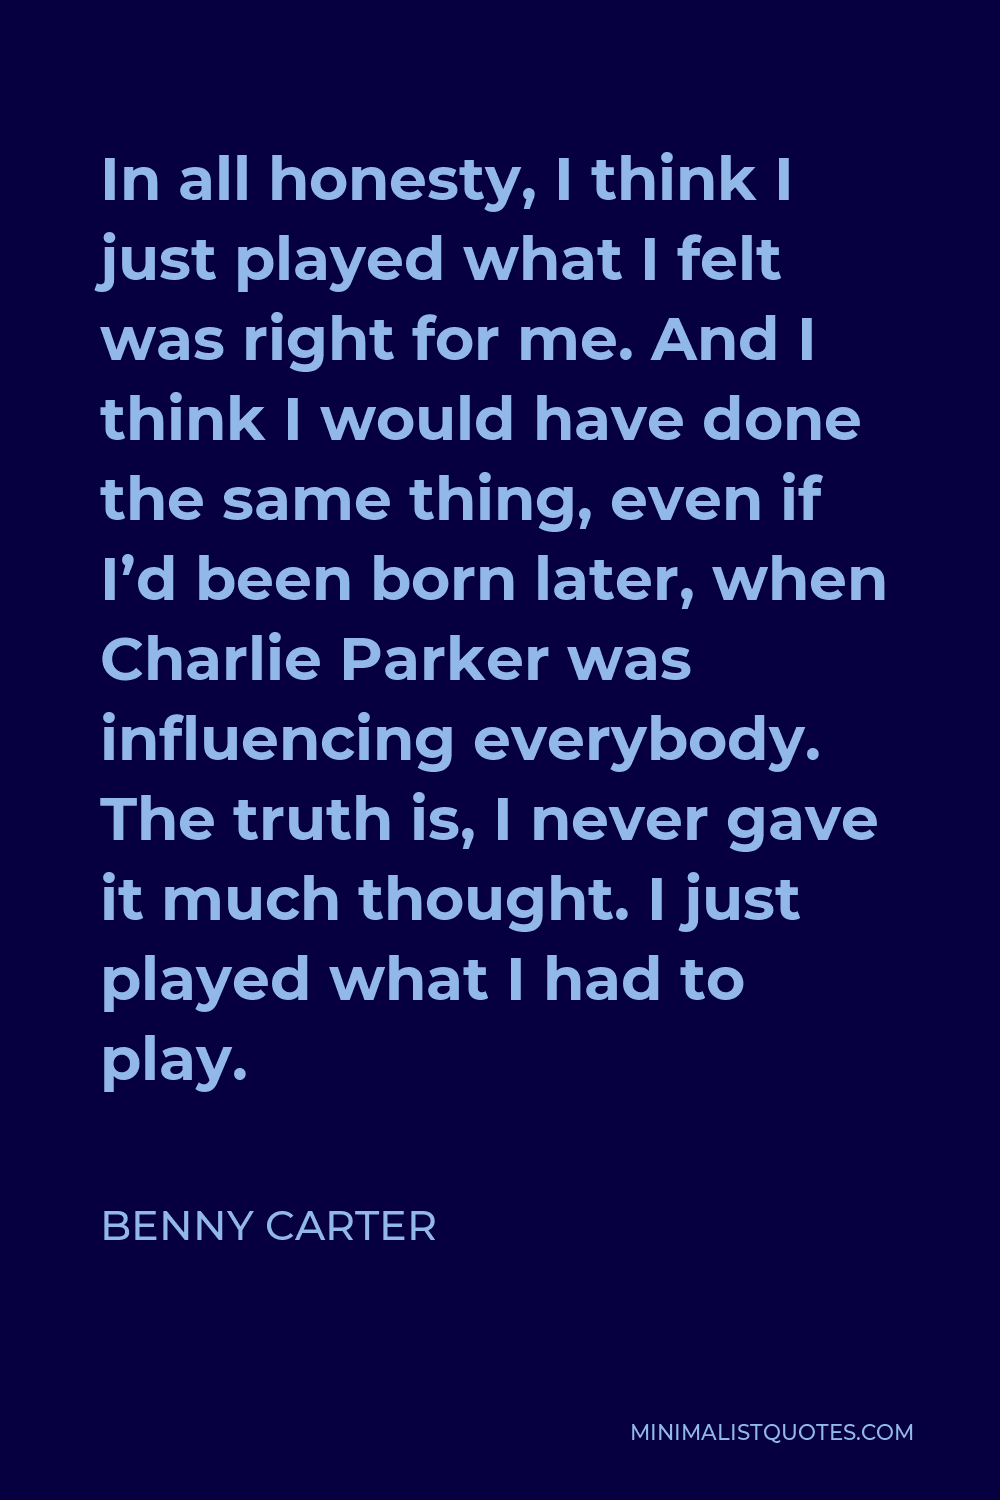 Benny Carter Quote - In all honesty, I think I just played what I felt was right for me. And I think I would have done the same thing, even if I’d been born later, when Charlie Parker was influencing everybody. The truth is, I never gave it much thought. I just played what I had to play.